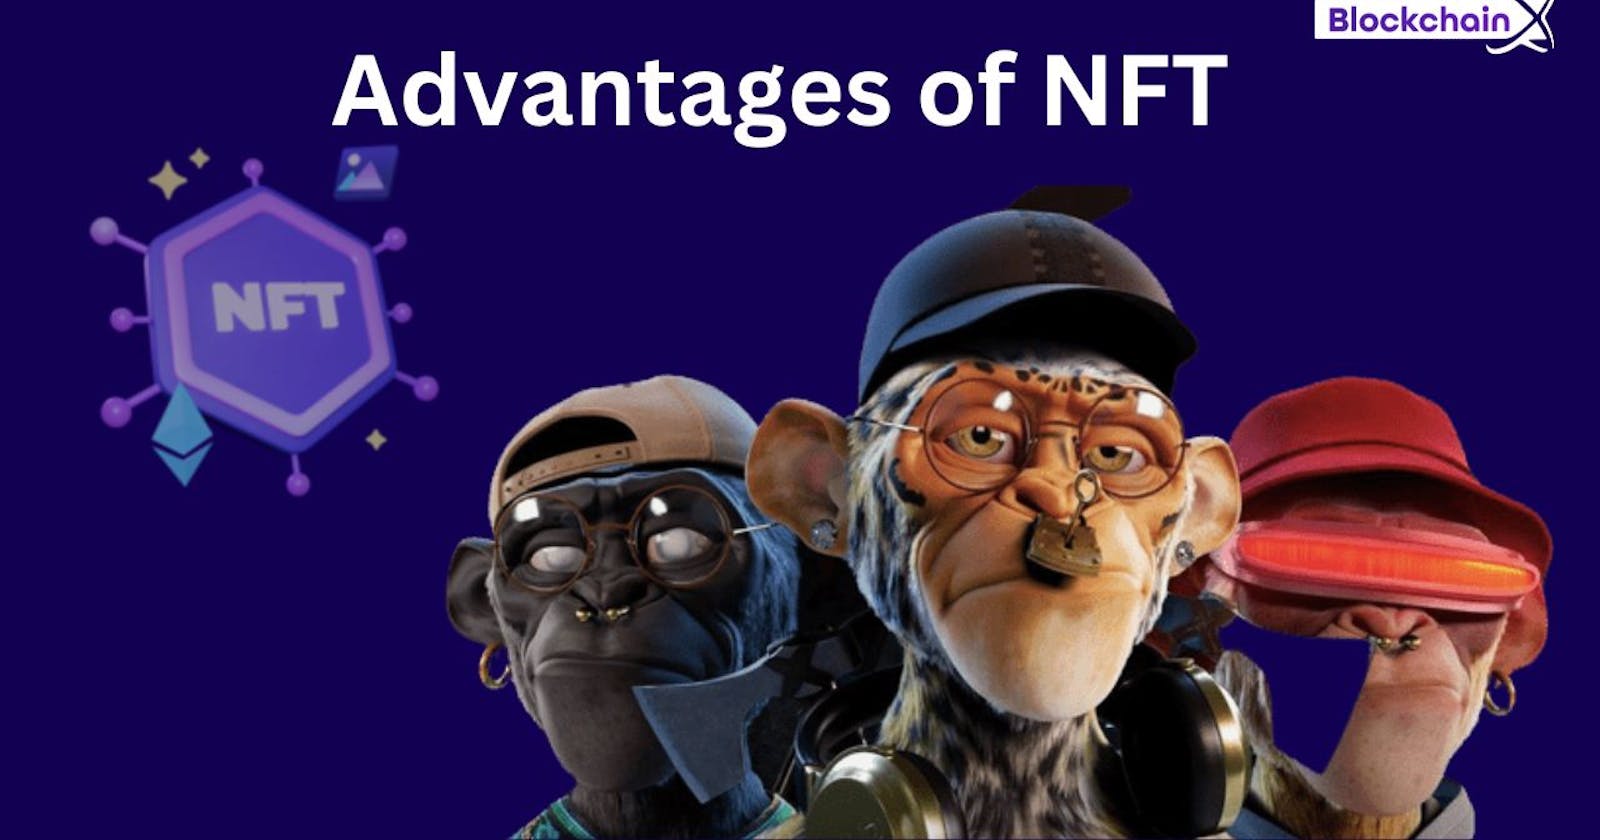 What are the Advantages of NFT?